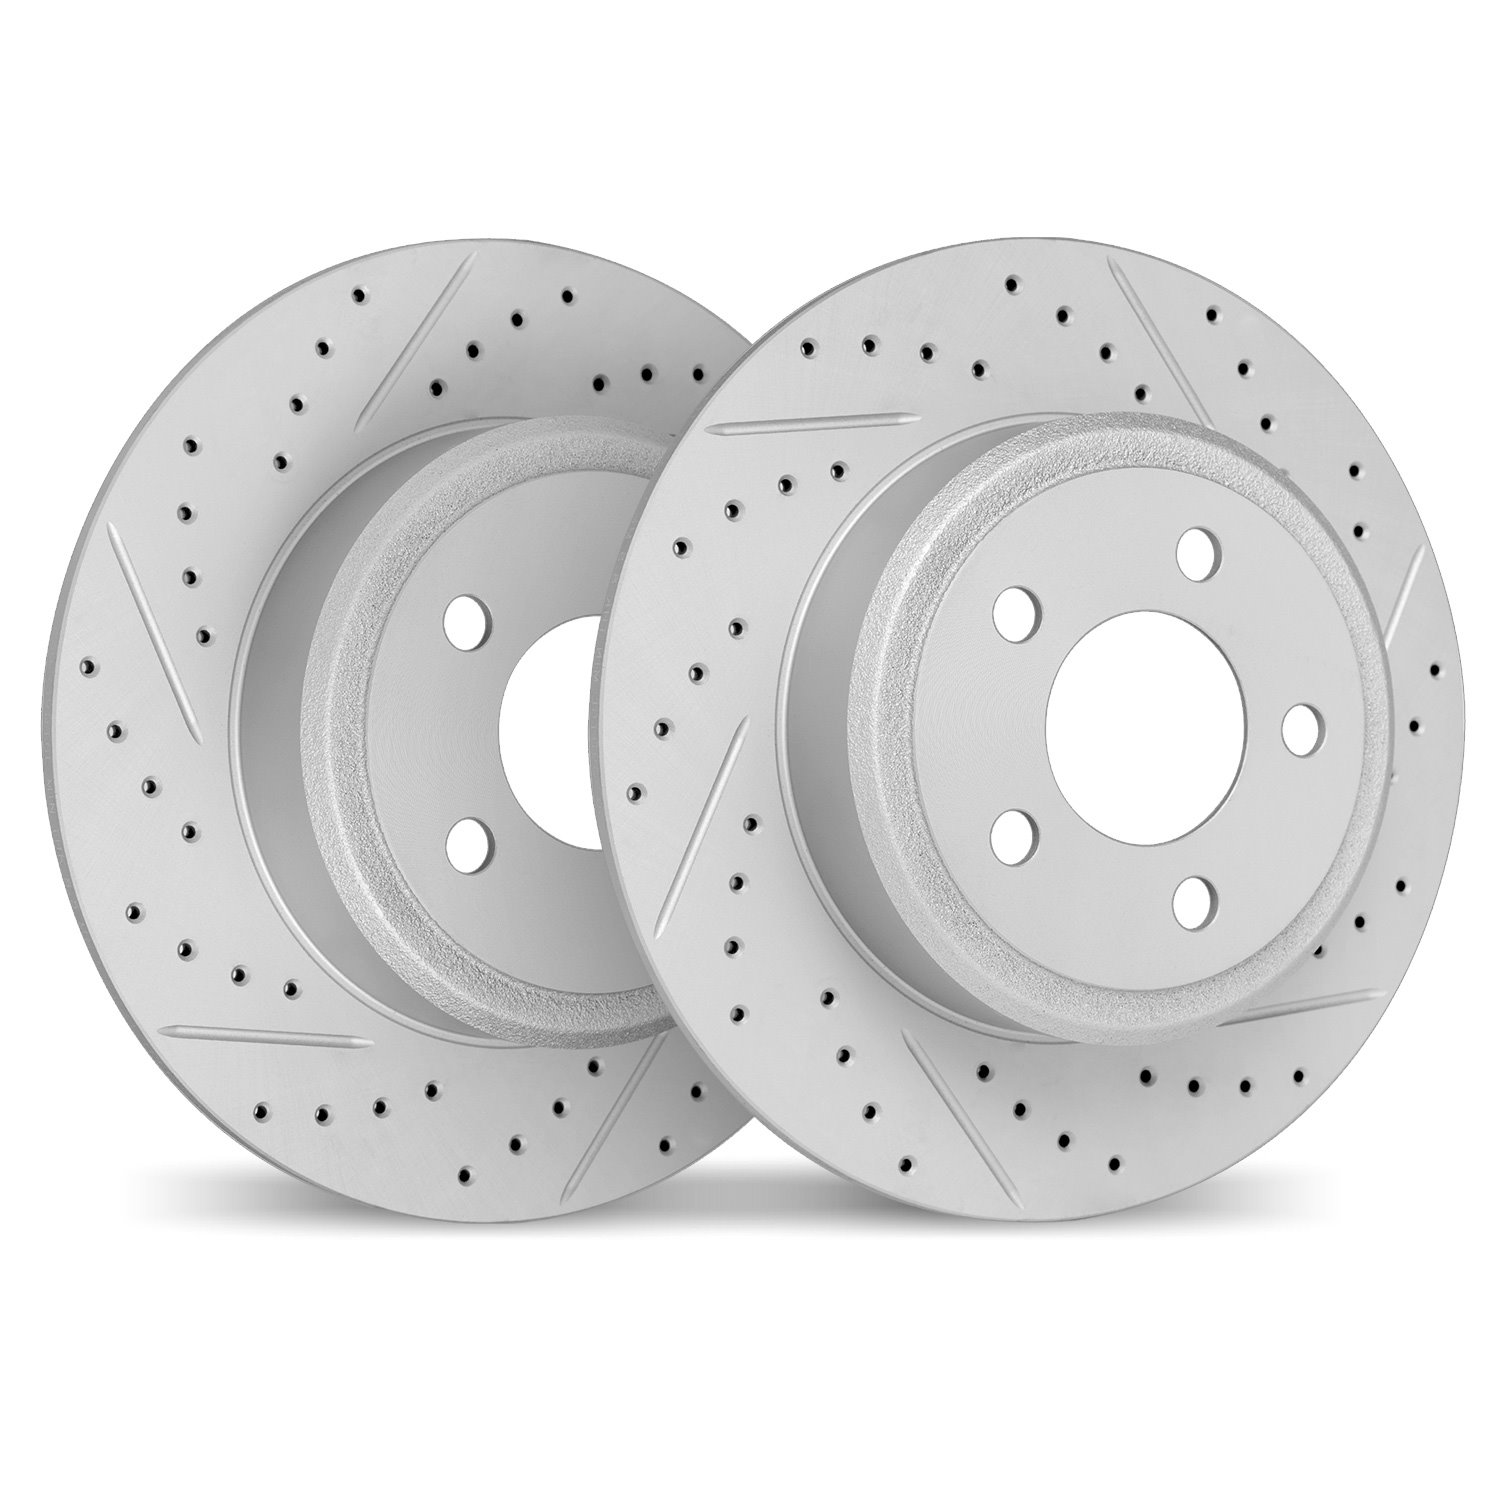 2002-54176 Geoperformance Drilled/Slotted Brake Rotors, 2015-2020 Ford/Lincoln/Mercury/Mazda, Position: Rear